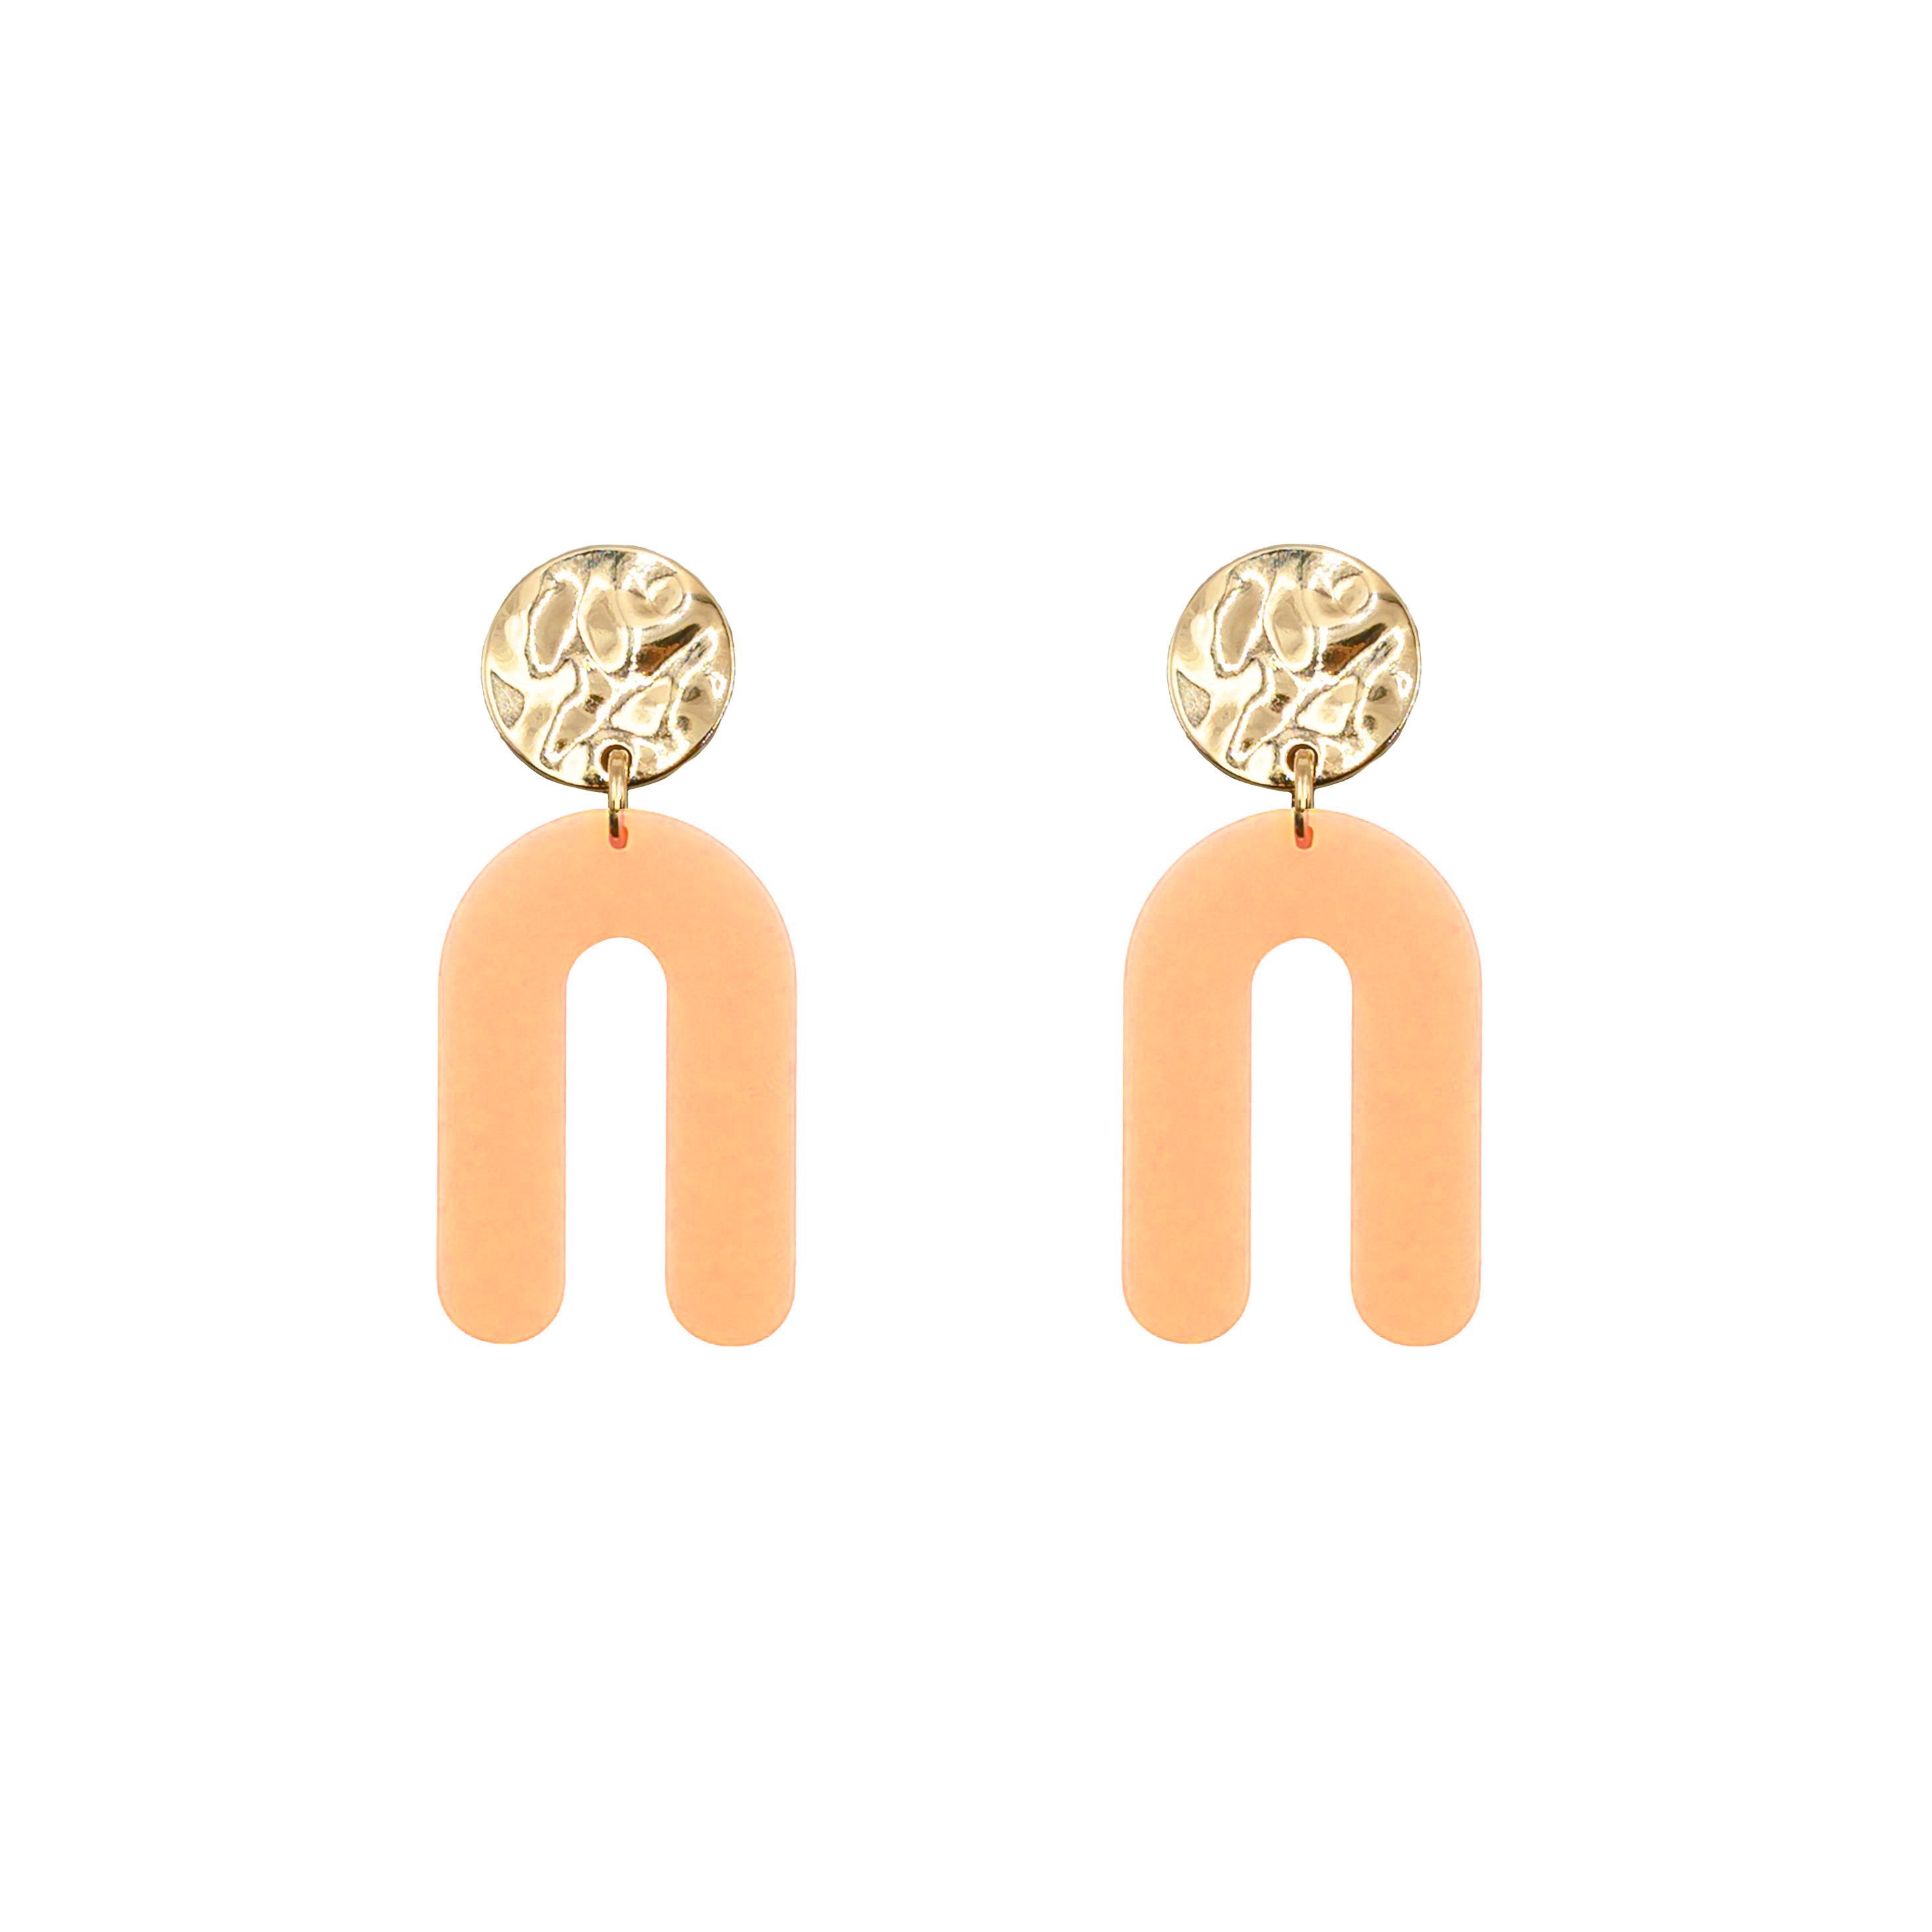 Rayne Collection - Sherbet Earrings fine designer jewelry for men and women